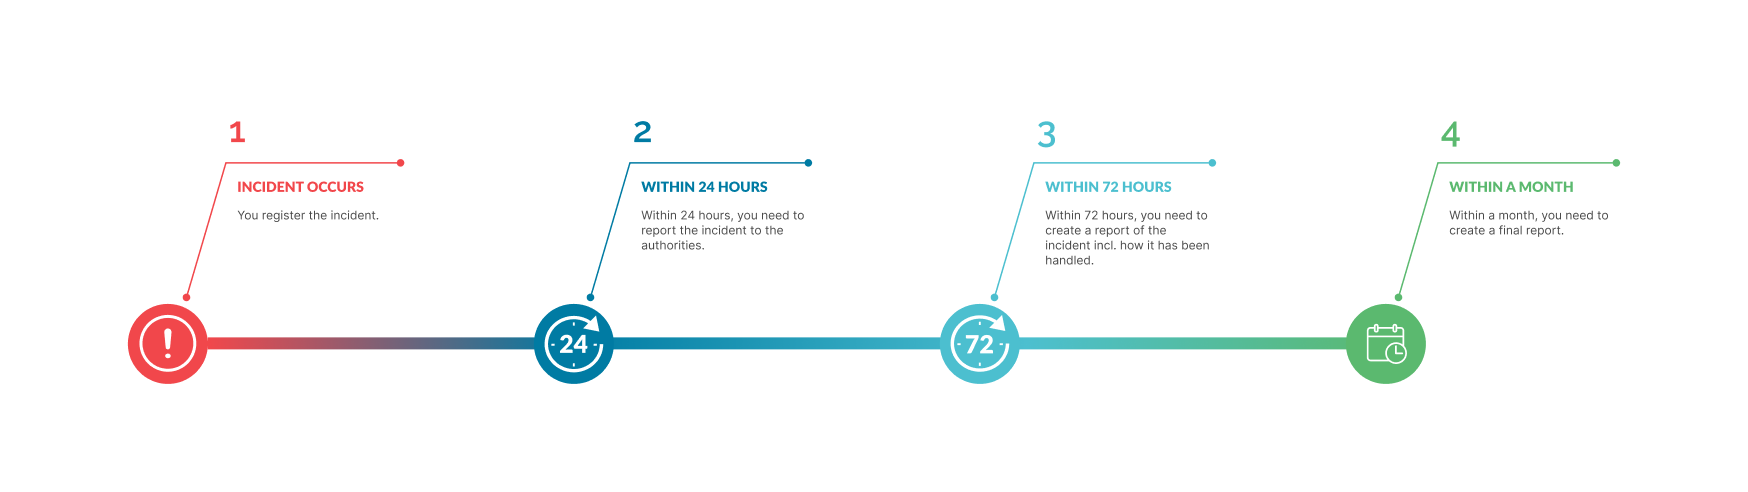 NIS2 incident response timeline - when to do what